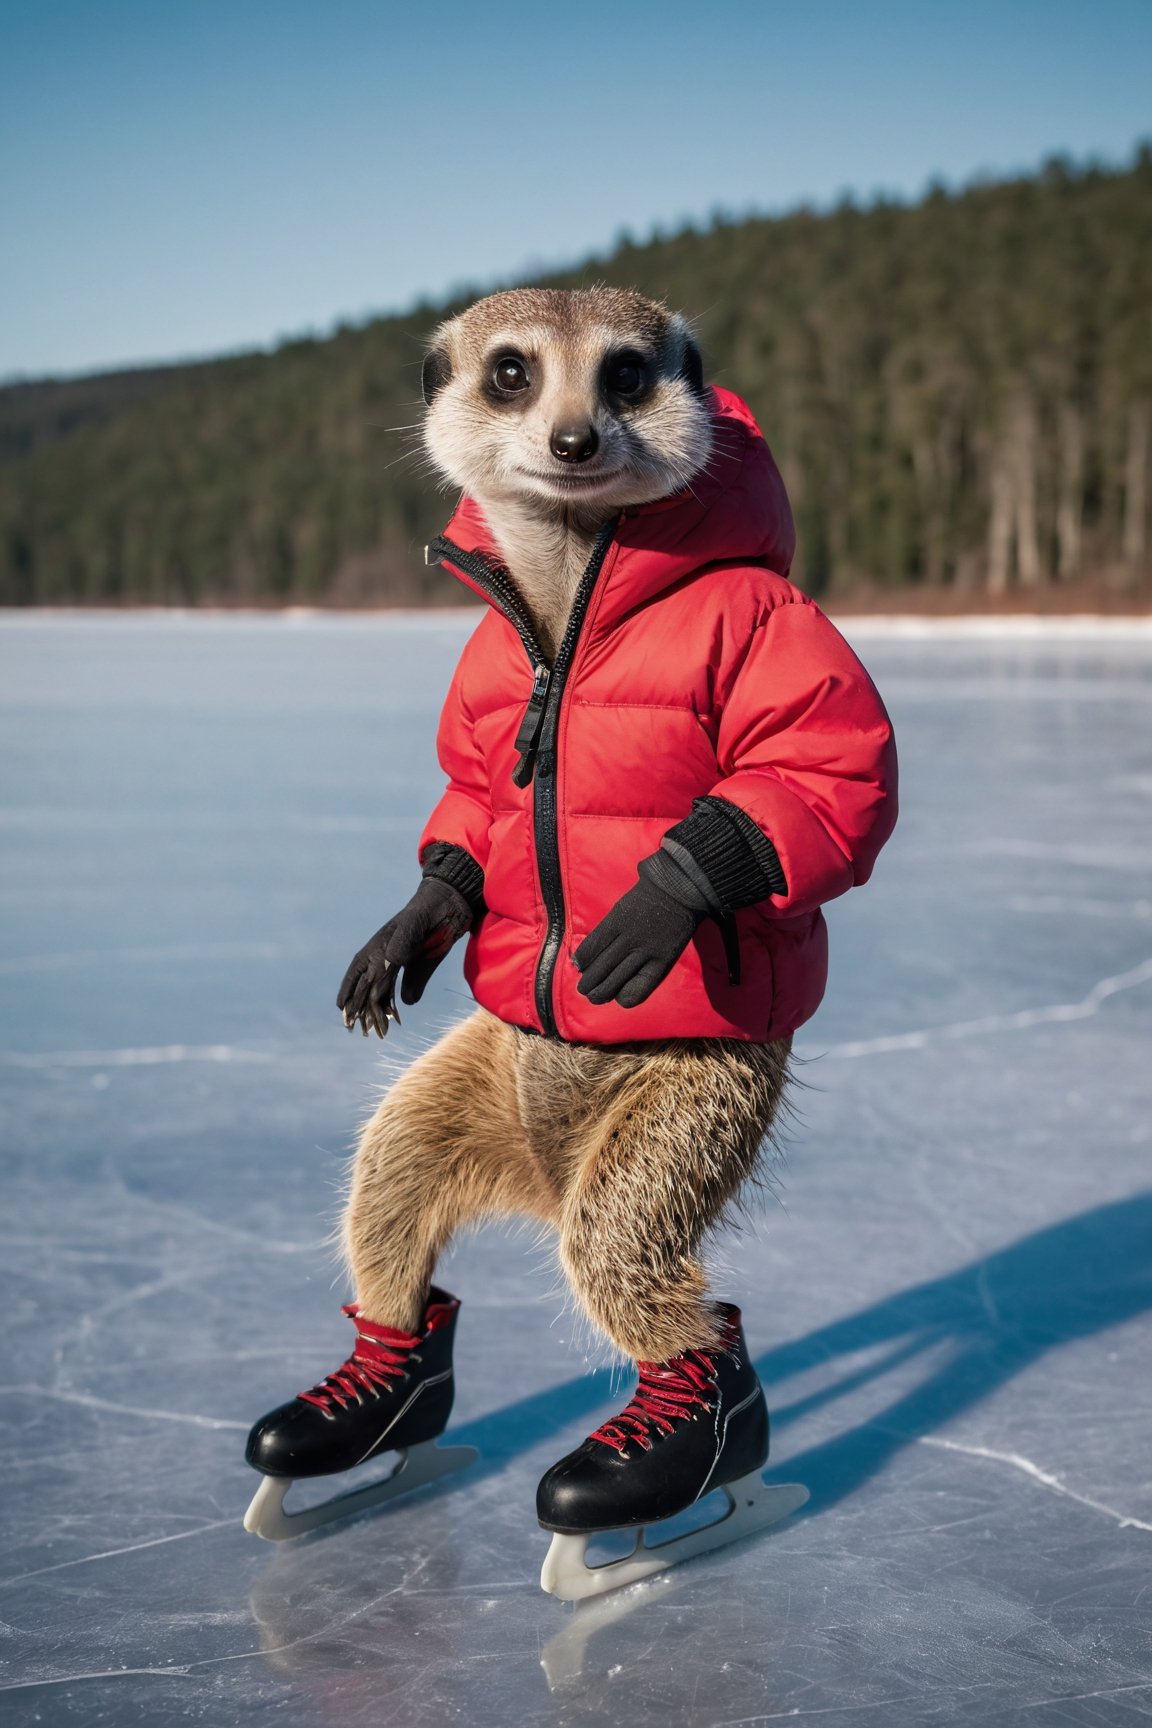 A anthropomorphic meerkat wearing a thick red down jacket and (ice skates), skating on a frozen lake, Norwegian forests in the background, early morning, cold lighting, highly detailed, Fujifilm XT-4

